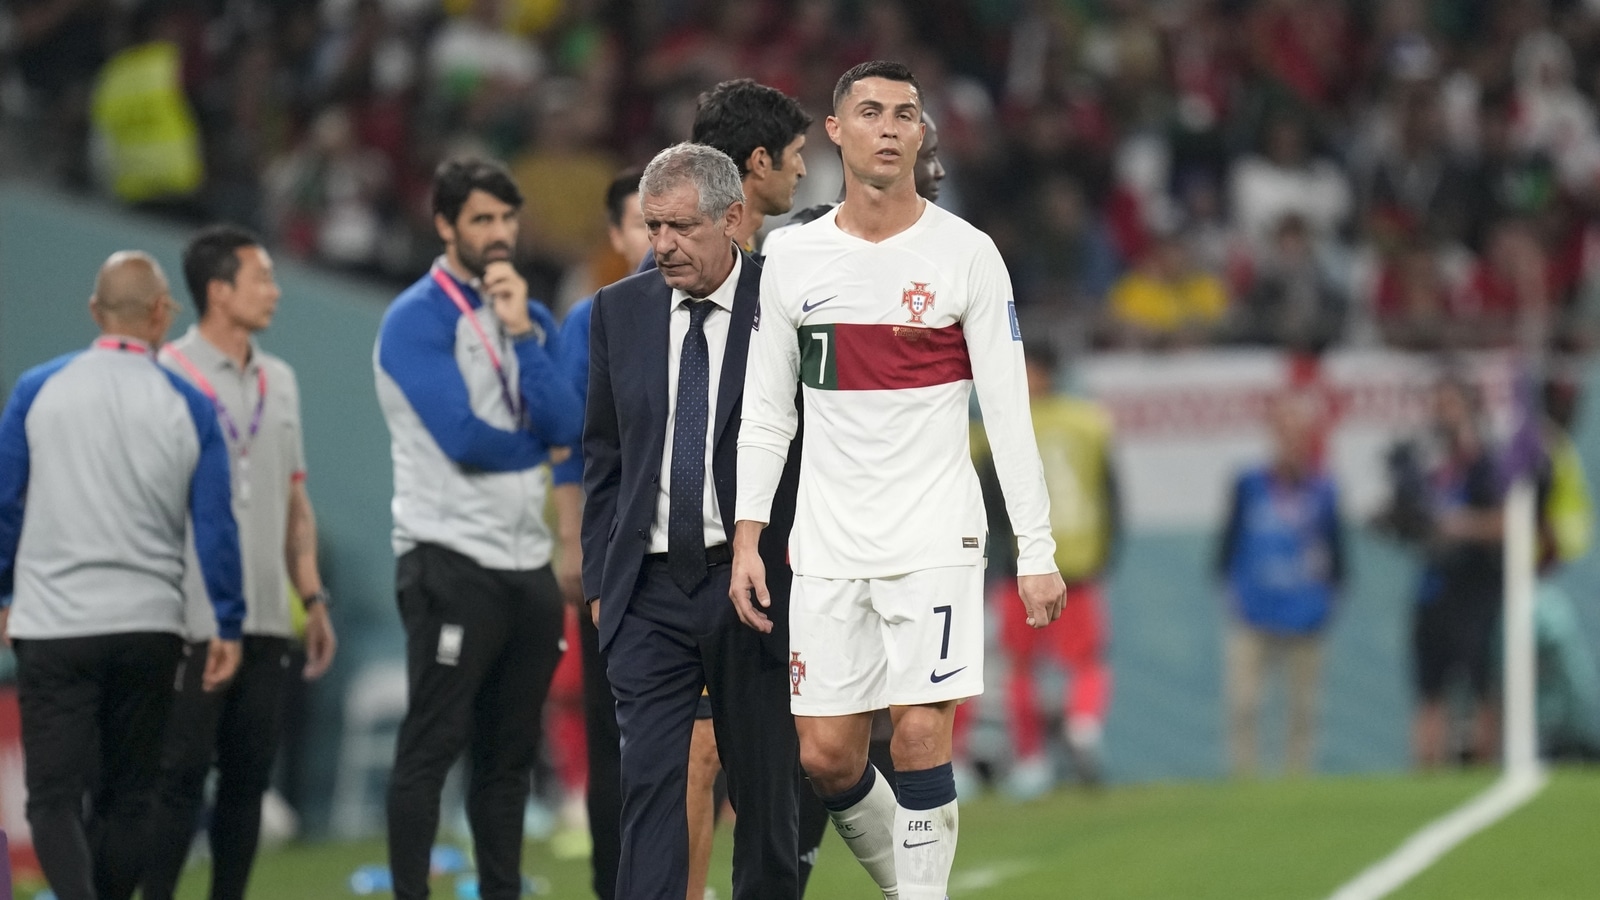 ‘Cristiano Ronaldo was unhappy’: Portugal manager Fernando Santos lifts the lid on rumours of rift at FIFA World Cup